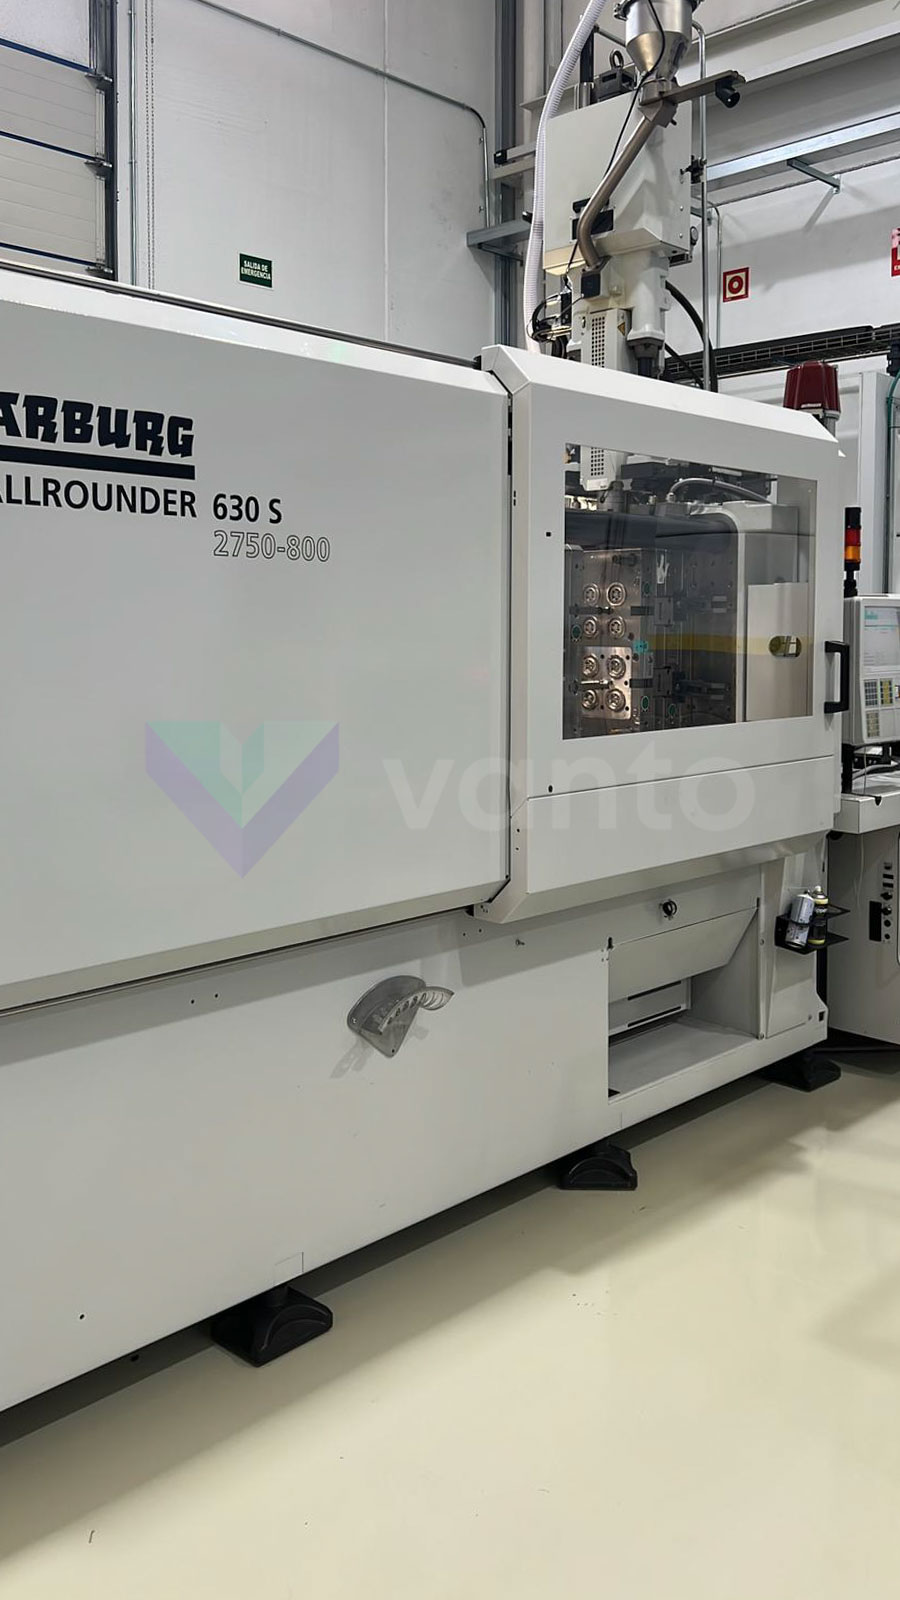 ARBURG 630 S ALLROUNDER  2750-800 275t bimaterial injection molding machine (2015) id10734